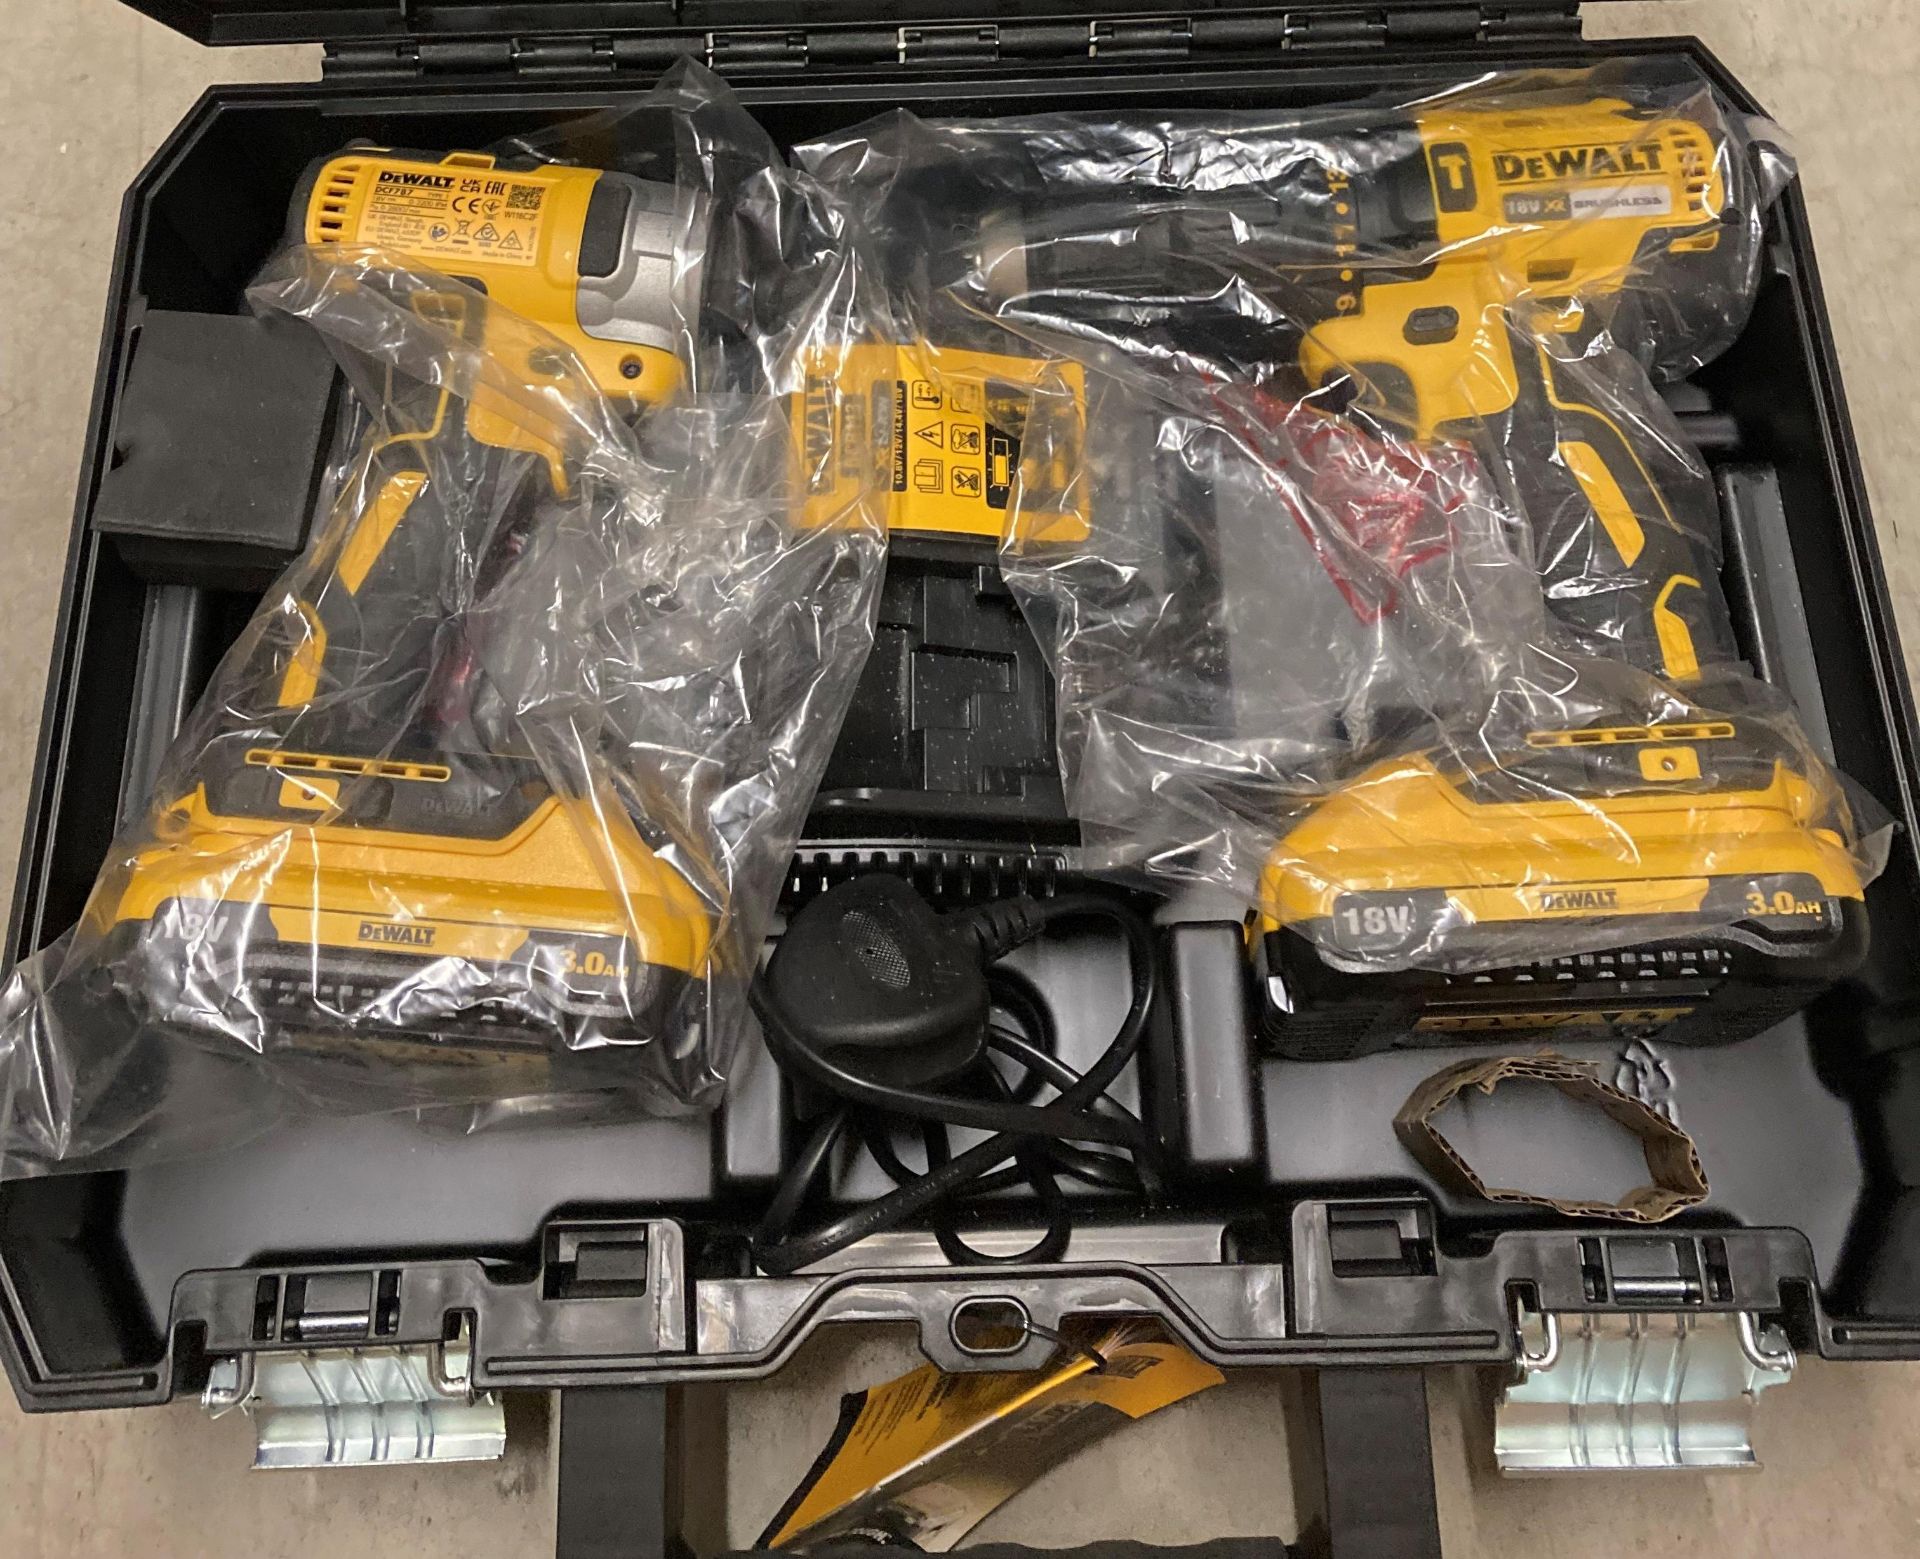 DeWalt 18v DCR 2060 L2t double-set including DCD 778 cordless hammer drill and a DCF 787 impact